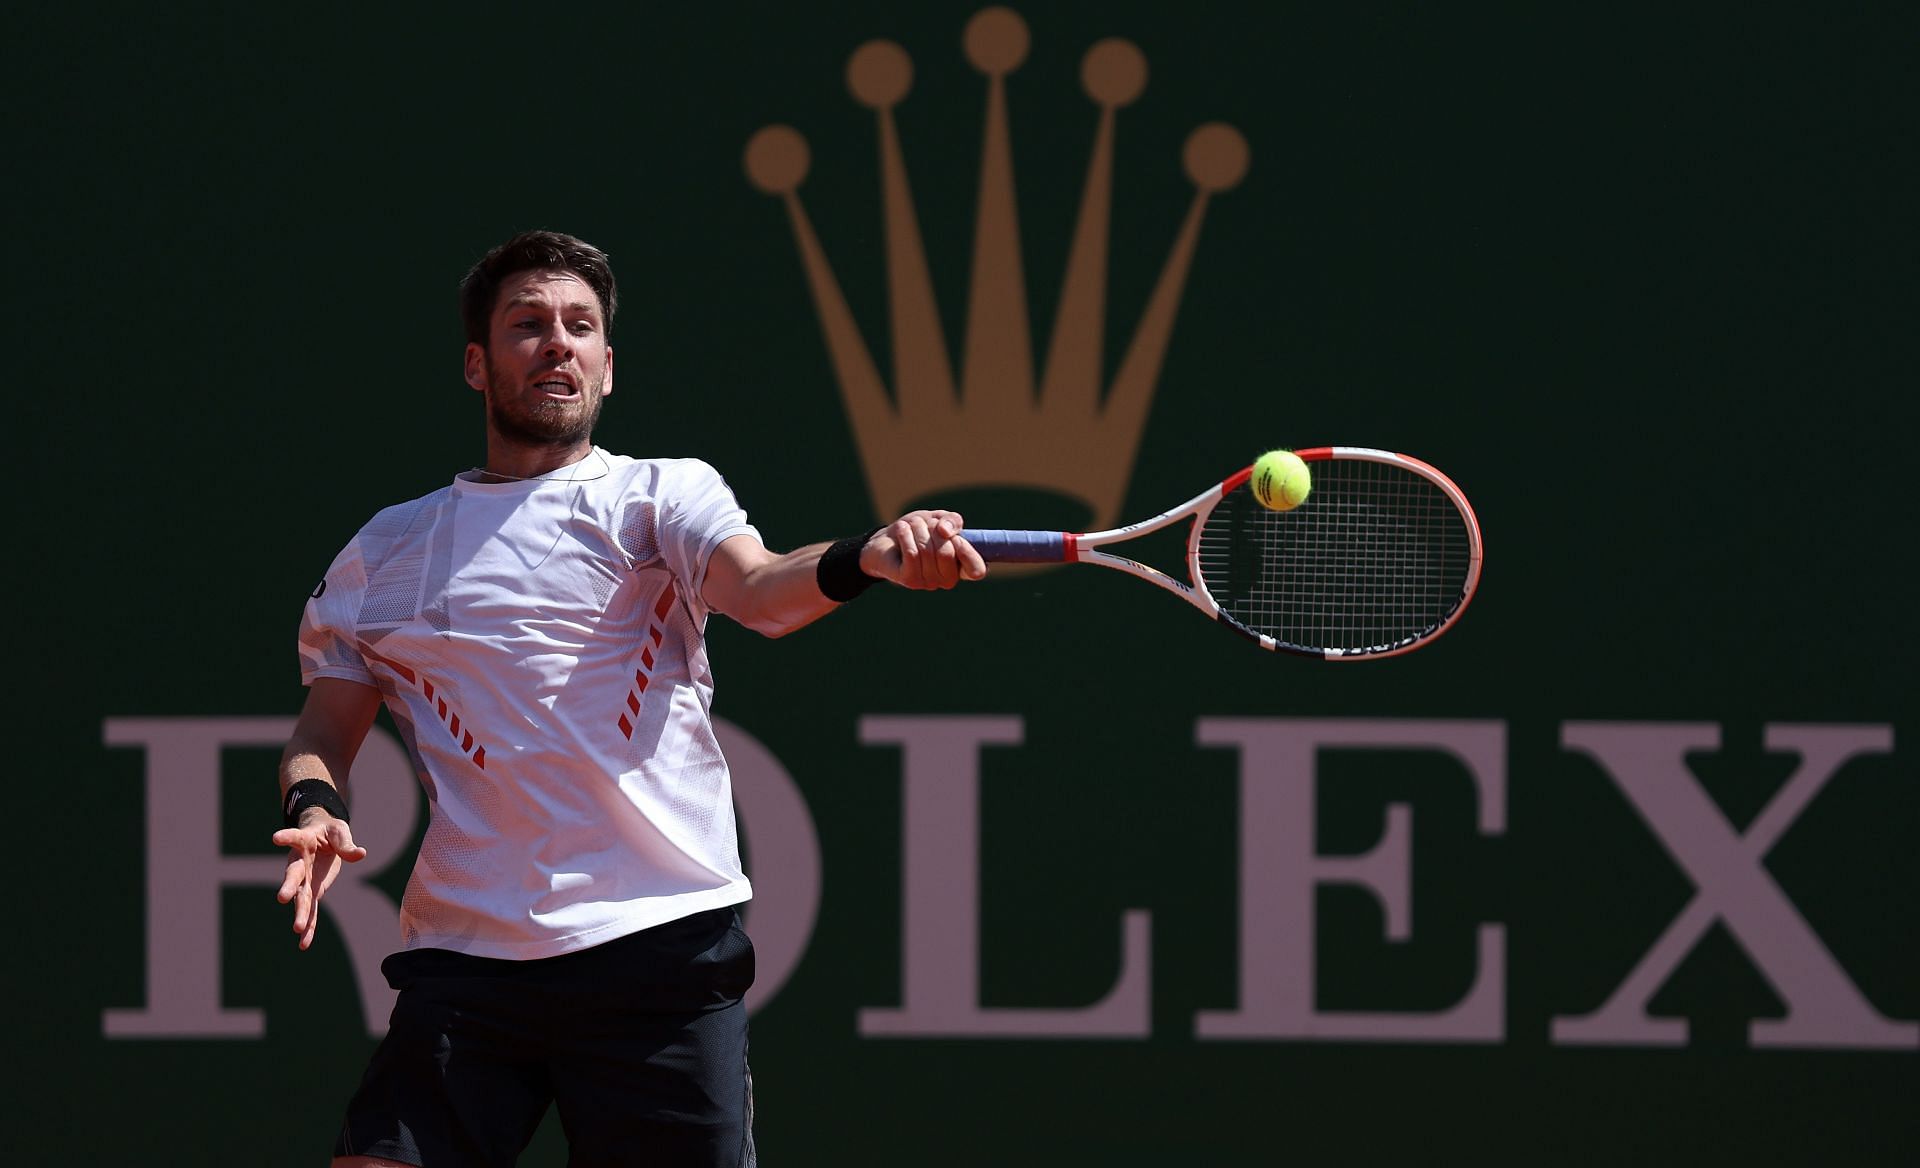 Cameron Norrie will look to build on his success this year at the Barcelona Open.